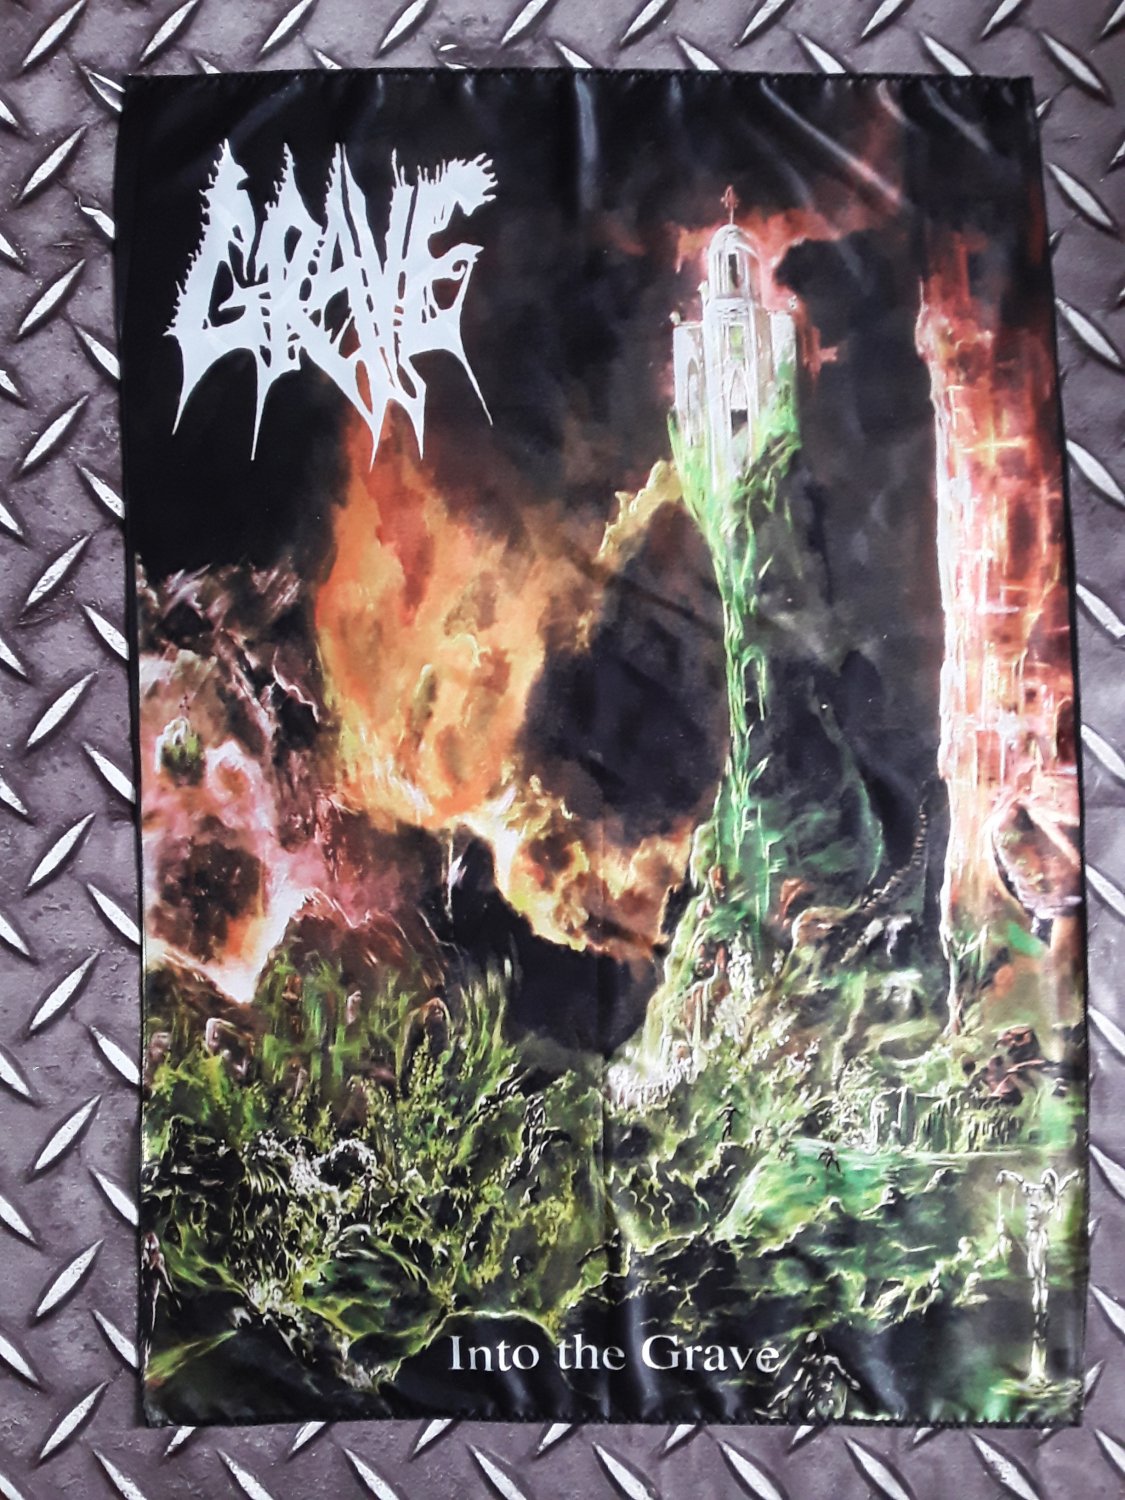 GRAVE - Into the grave POSTER FLAG Death metal cloth poster Bolt thrower